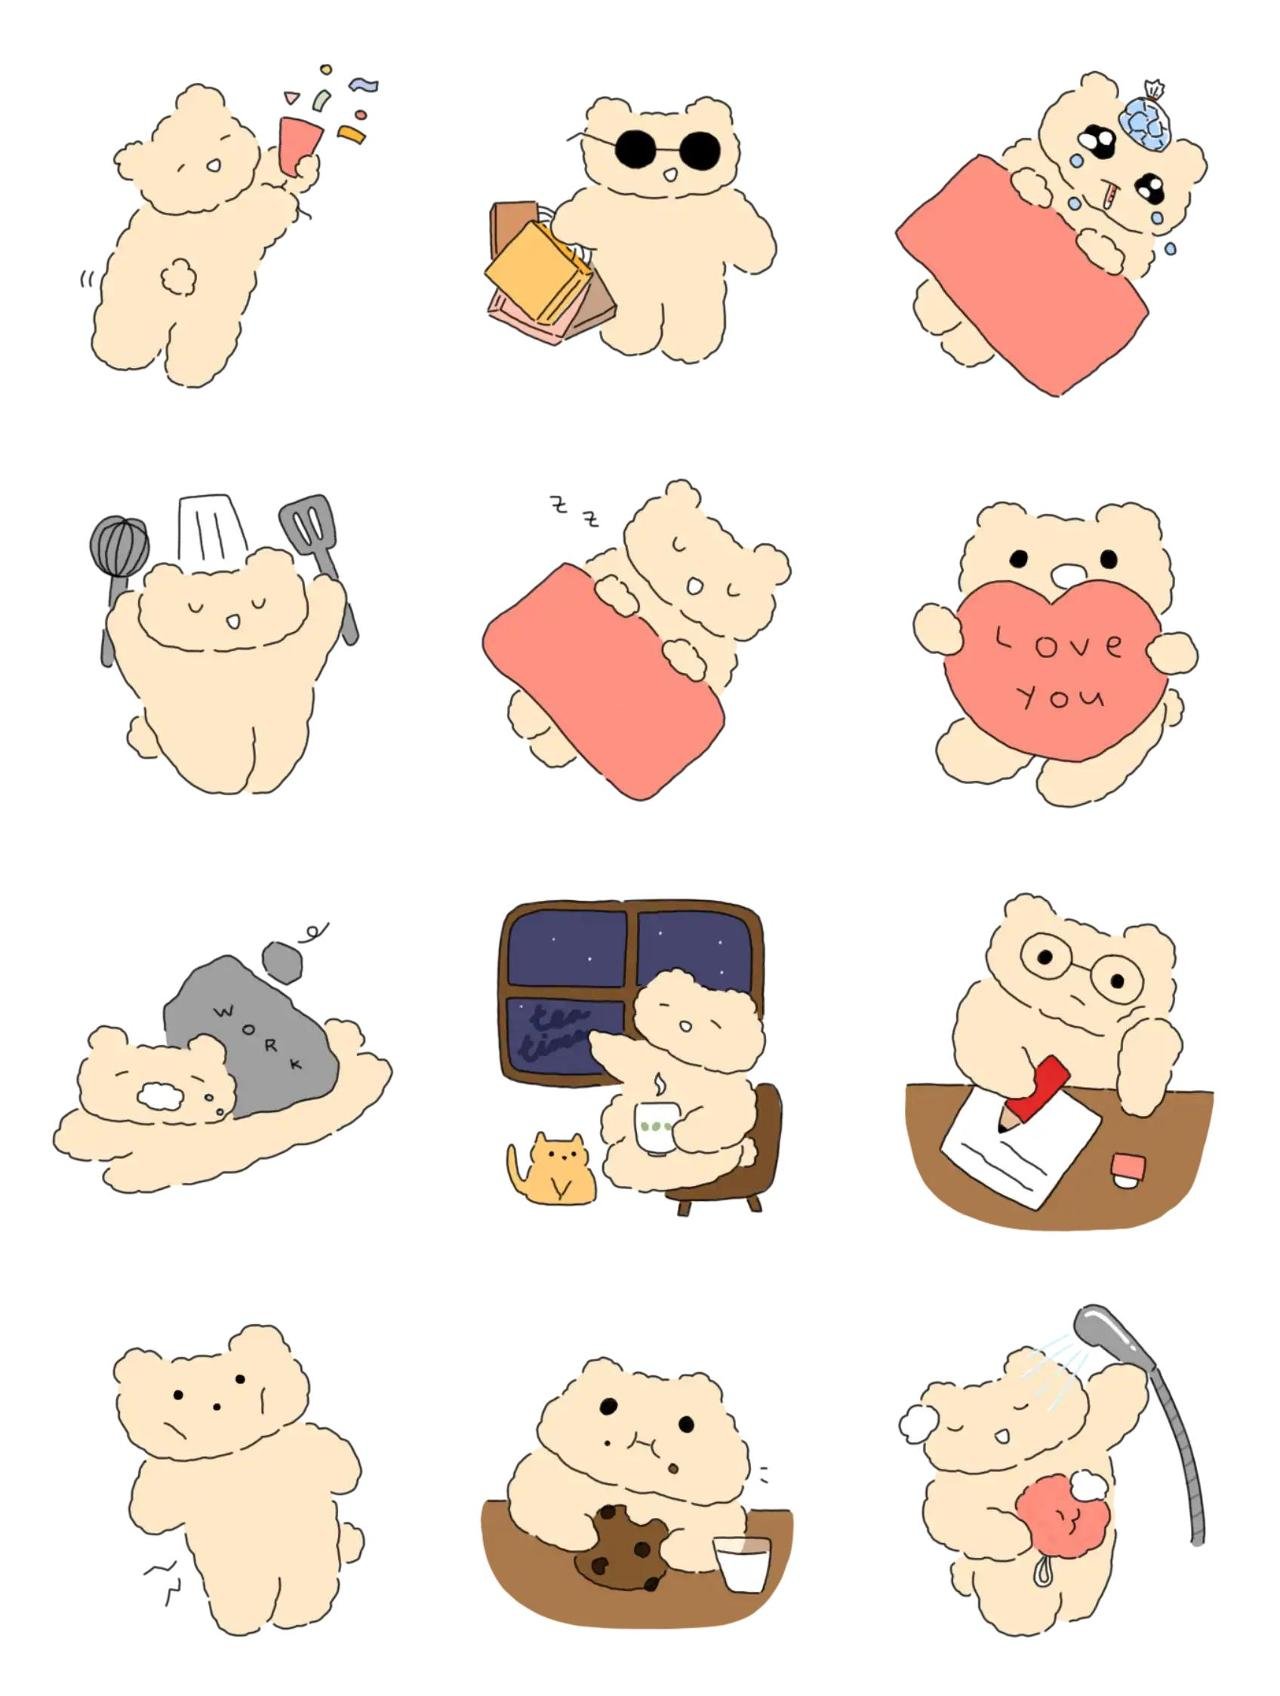 Daily muu Animation/Cartoon,Animals sticker pack for Whatsapp, Telegram, Signal, and others chatting and message apps